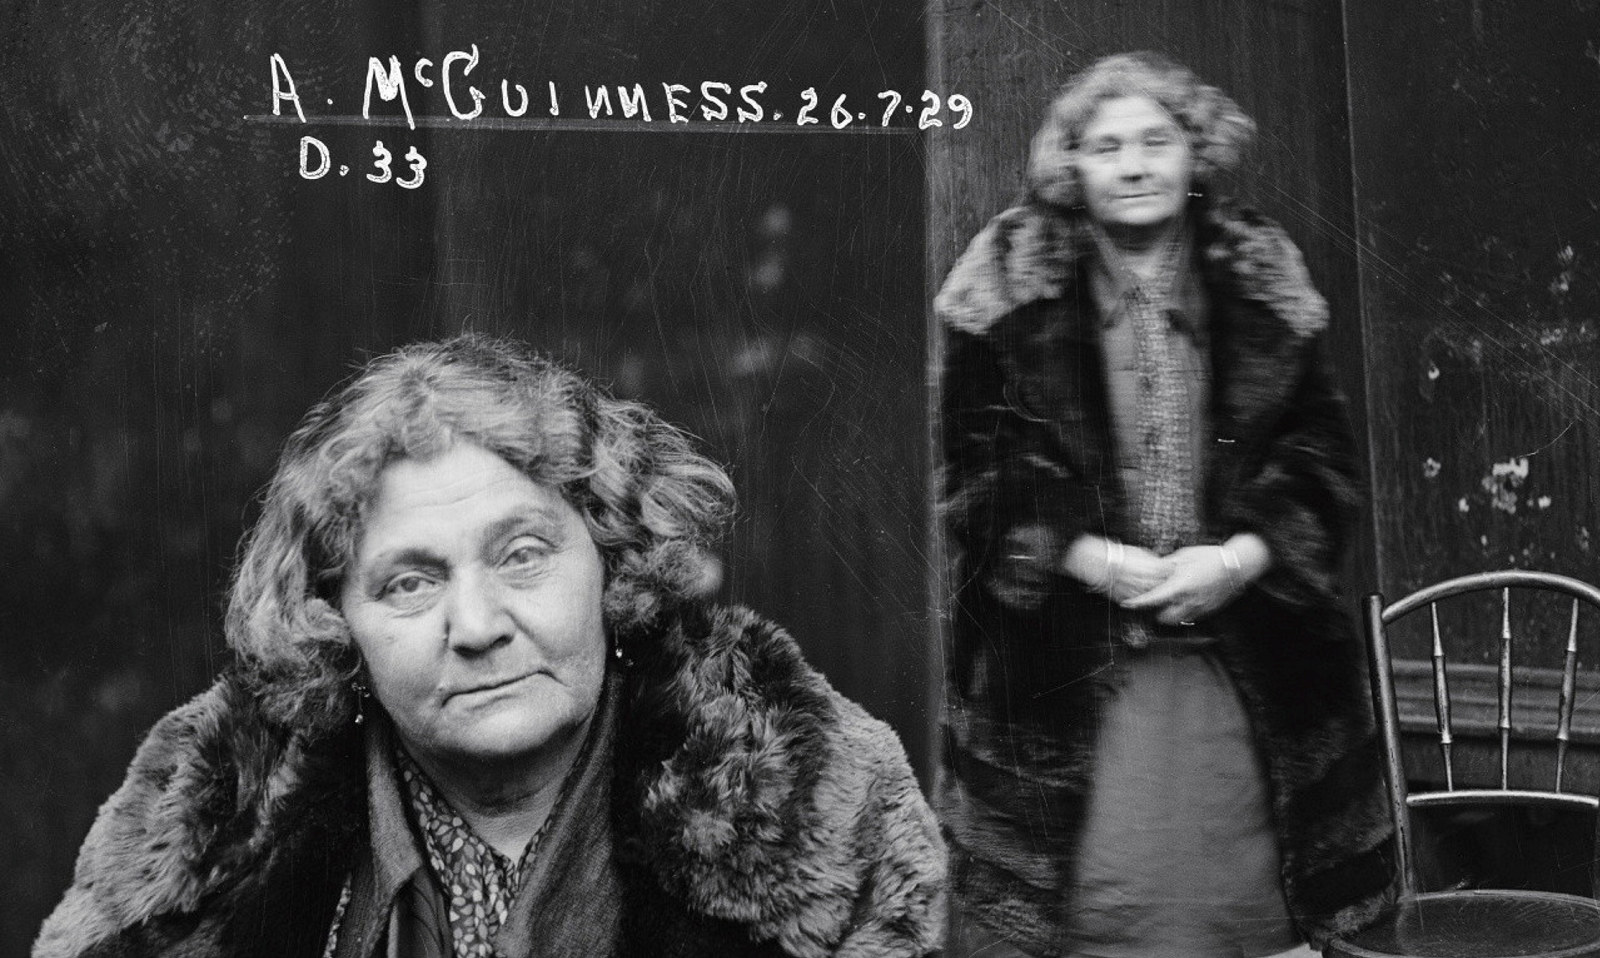 Dual mugshot of woman seated and standing, with standing shot showing blurred movement.